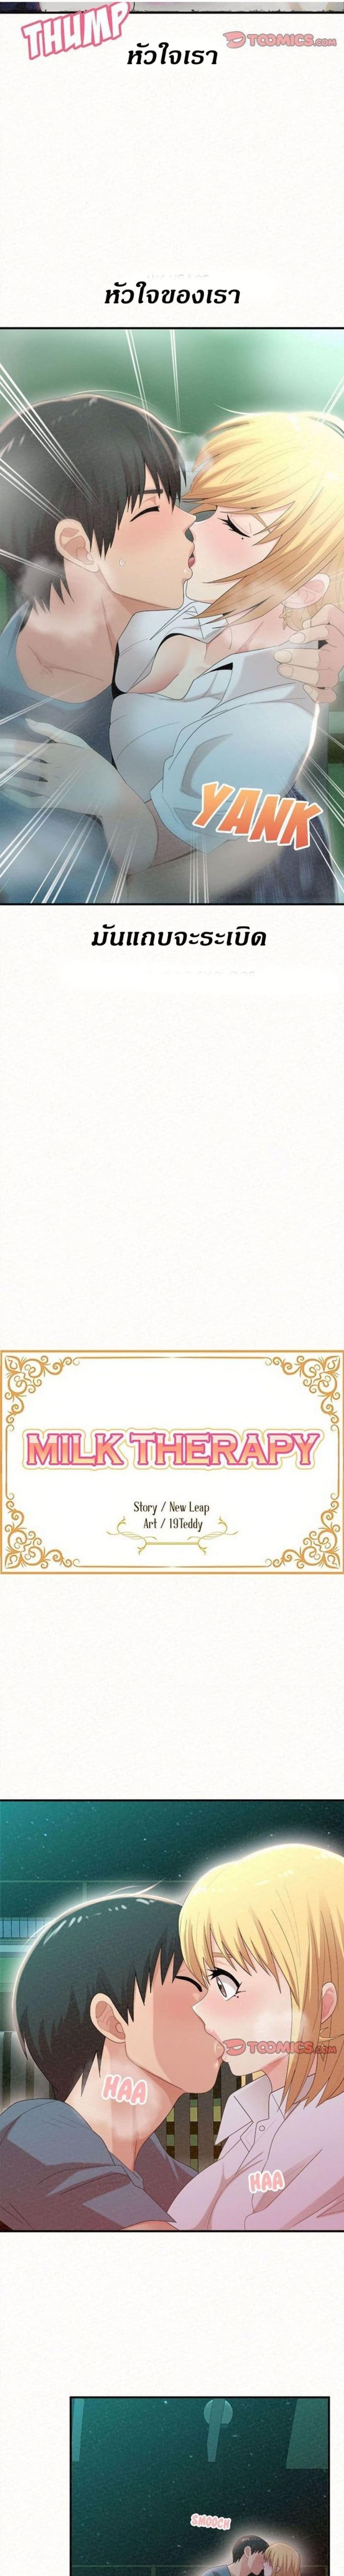 Milk Therapy02